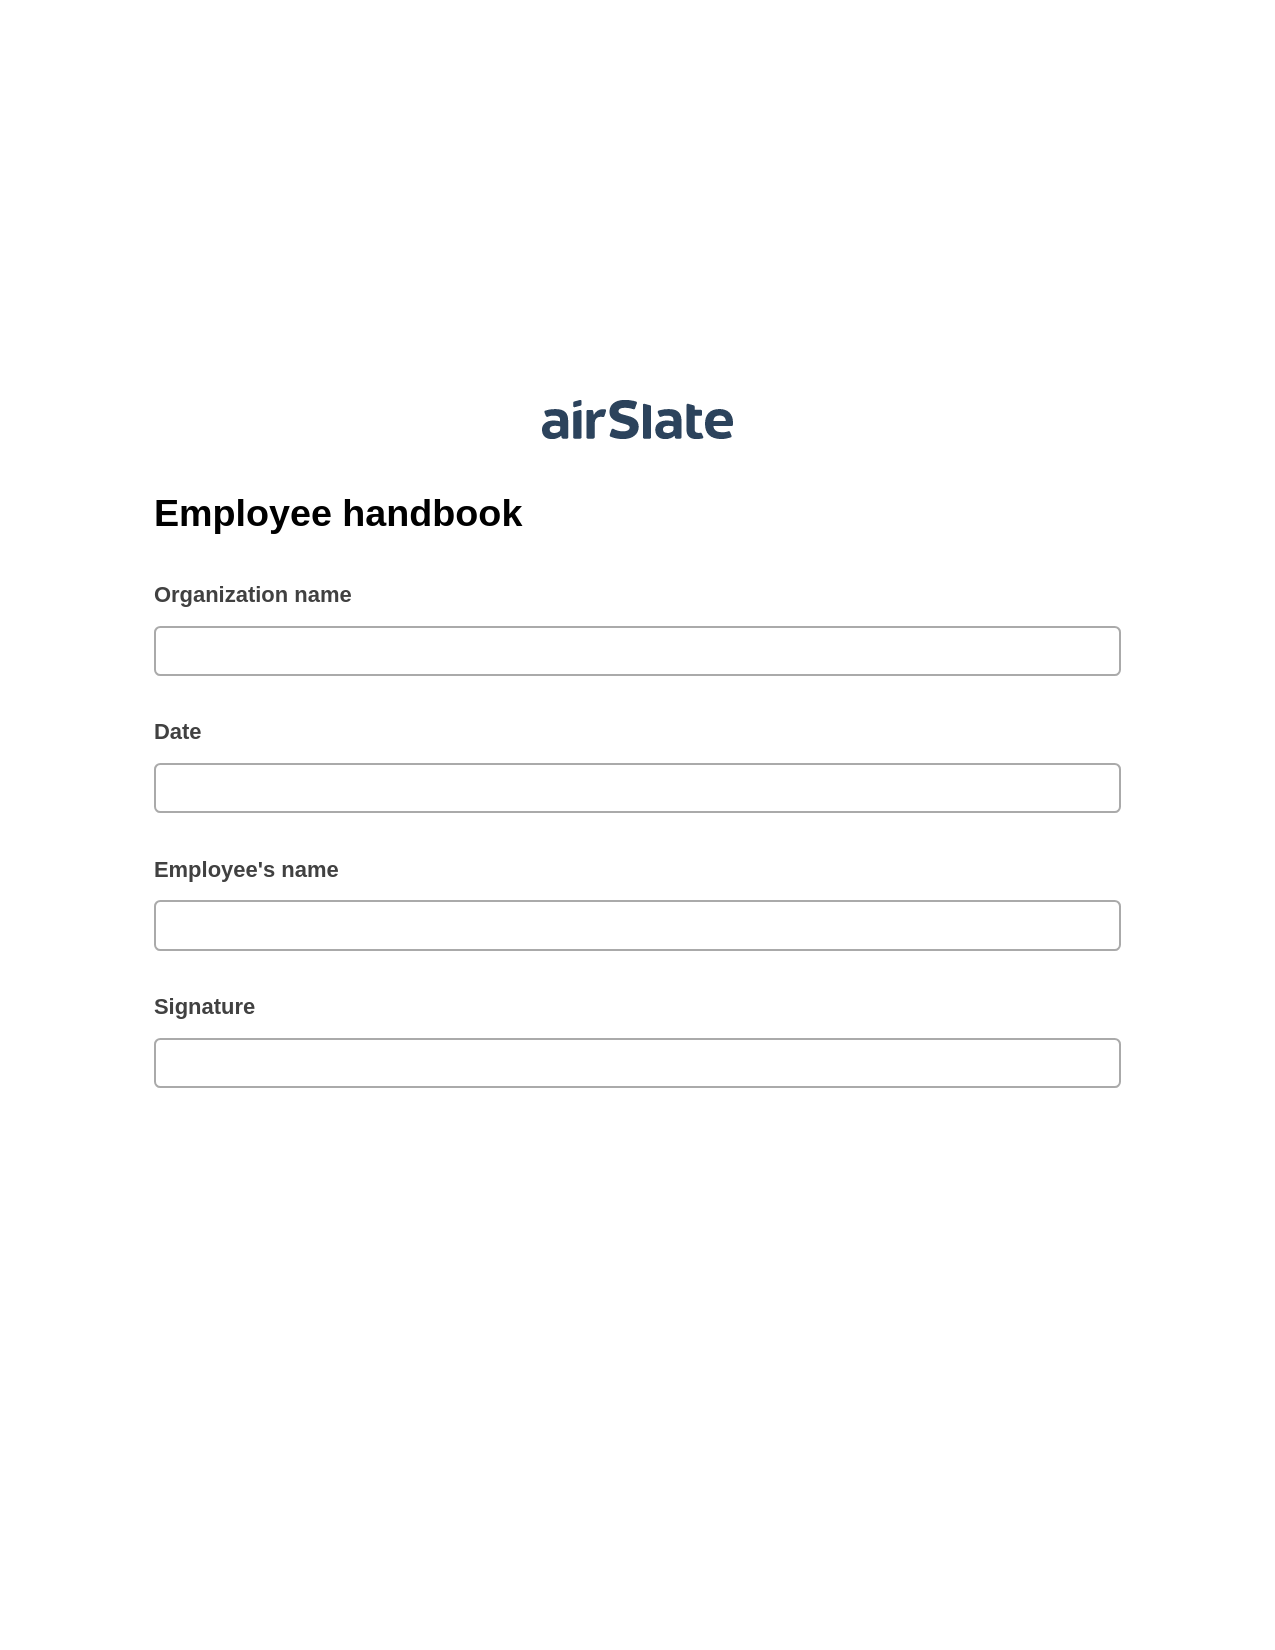 Employee handbook Pre-fill from NetSuite Records Bot, Pre-fill with Custom Data Bot, Export to Smartsheet